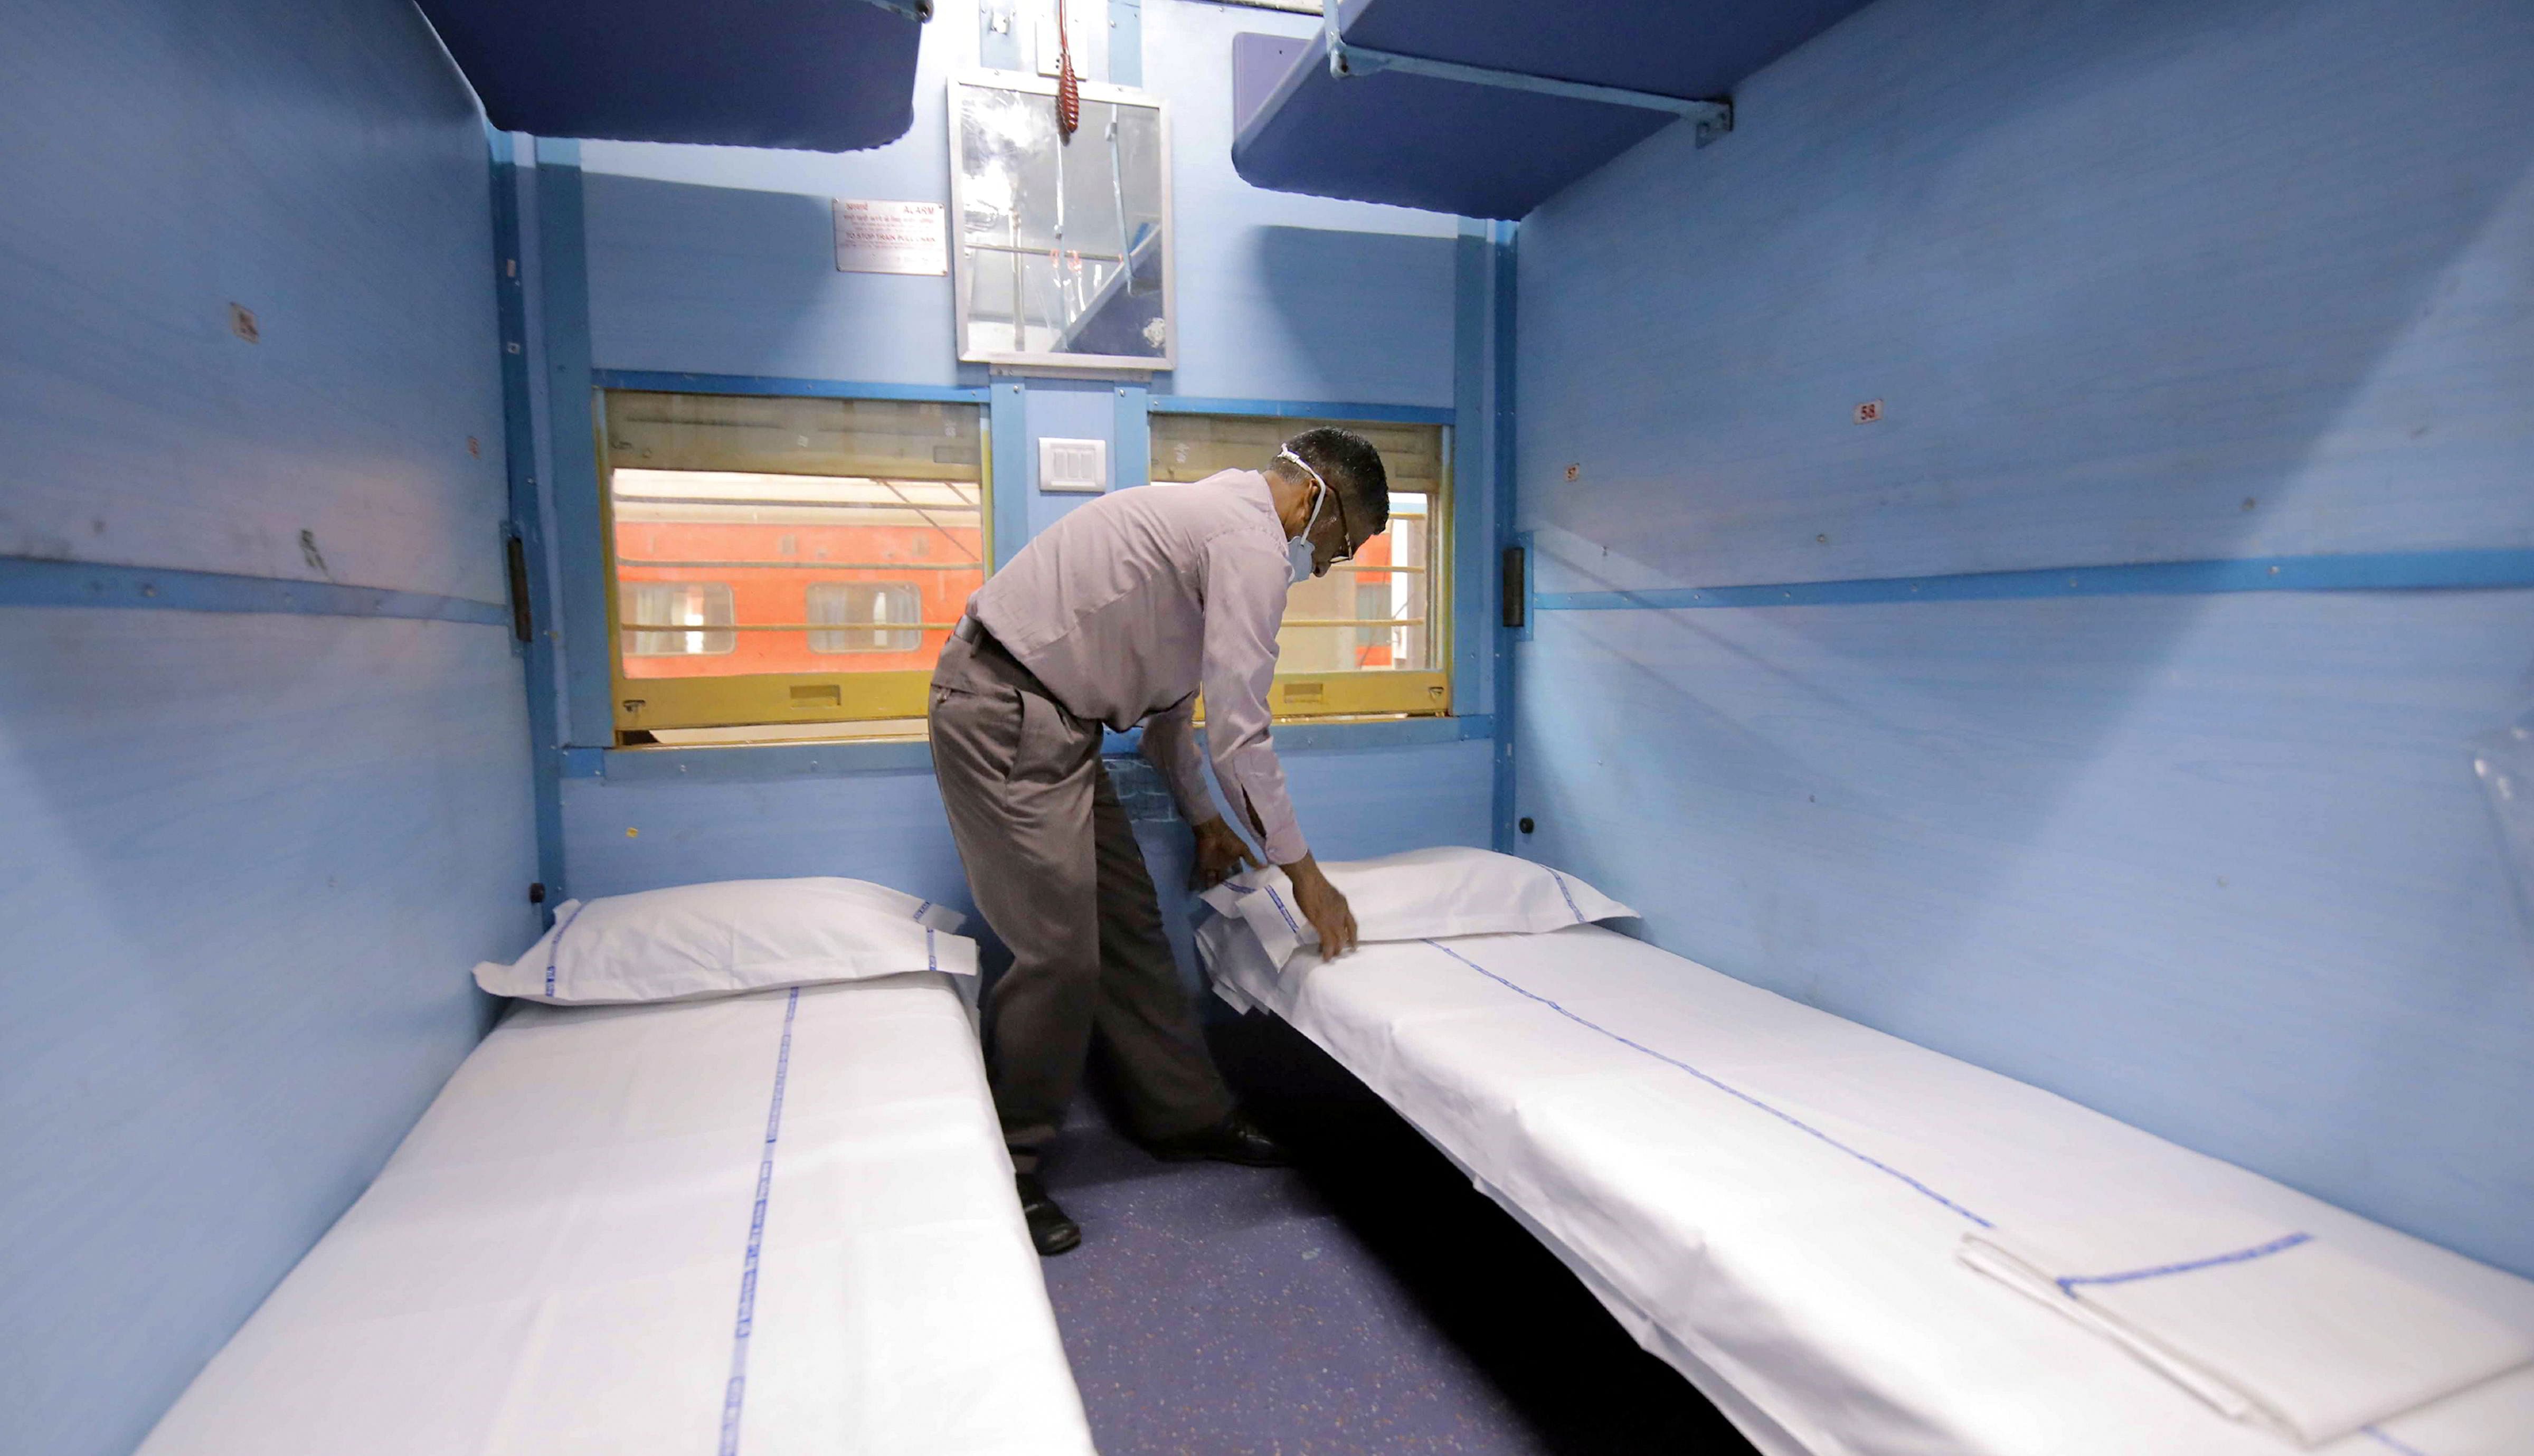 Railways worker prepares a train coach converted into isolation ward for COVID 19 patients, during the nationwide lockdown in the wake of coronavirus pandemic. (PTI Photo)